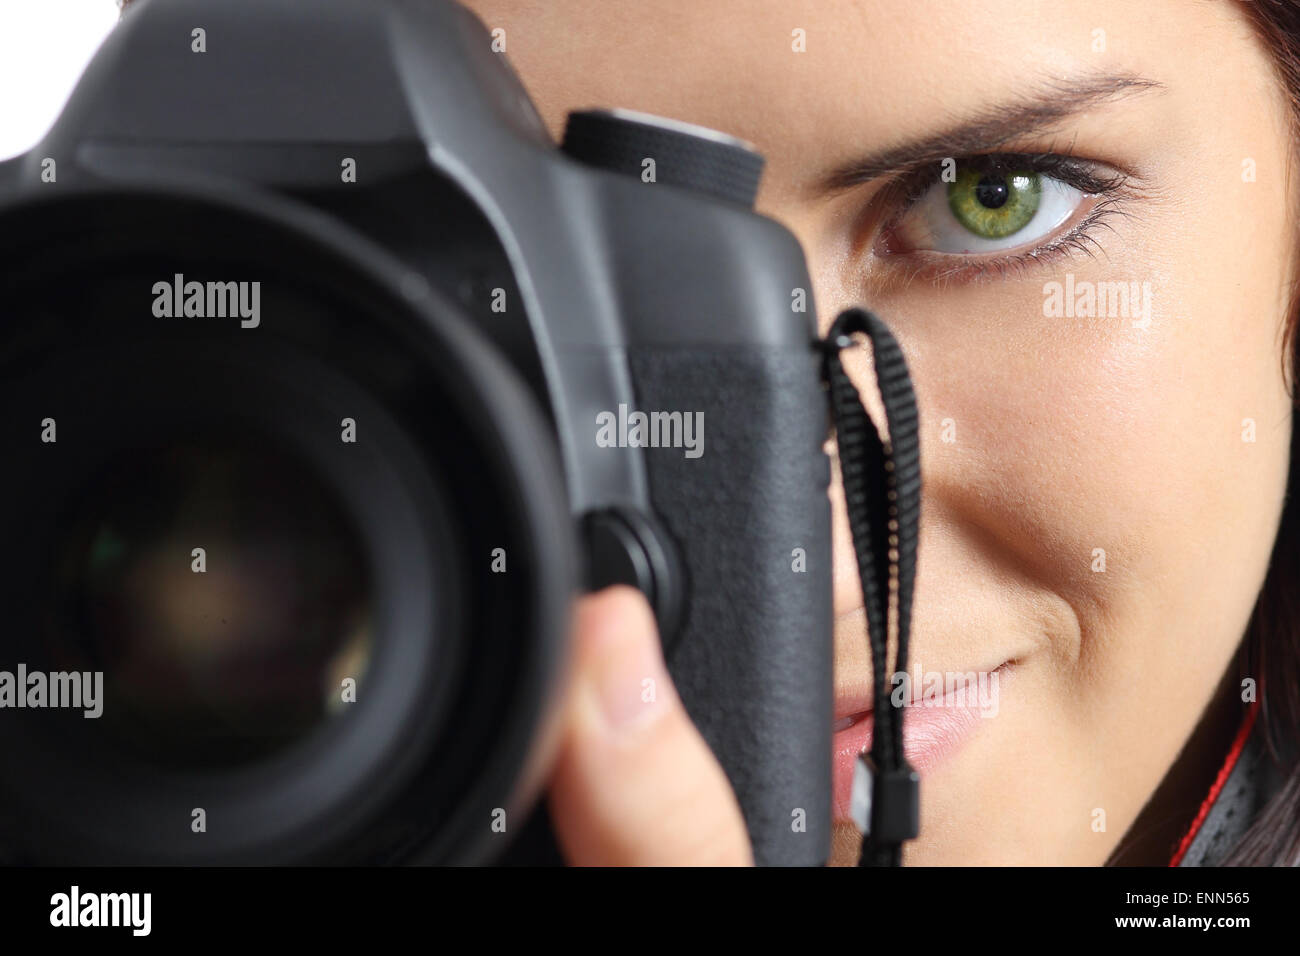 Close up of front view of a photographer woman eye photographing with a dslr camera Stock Photo